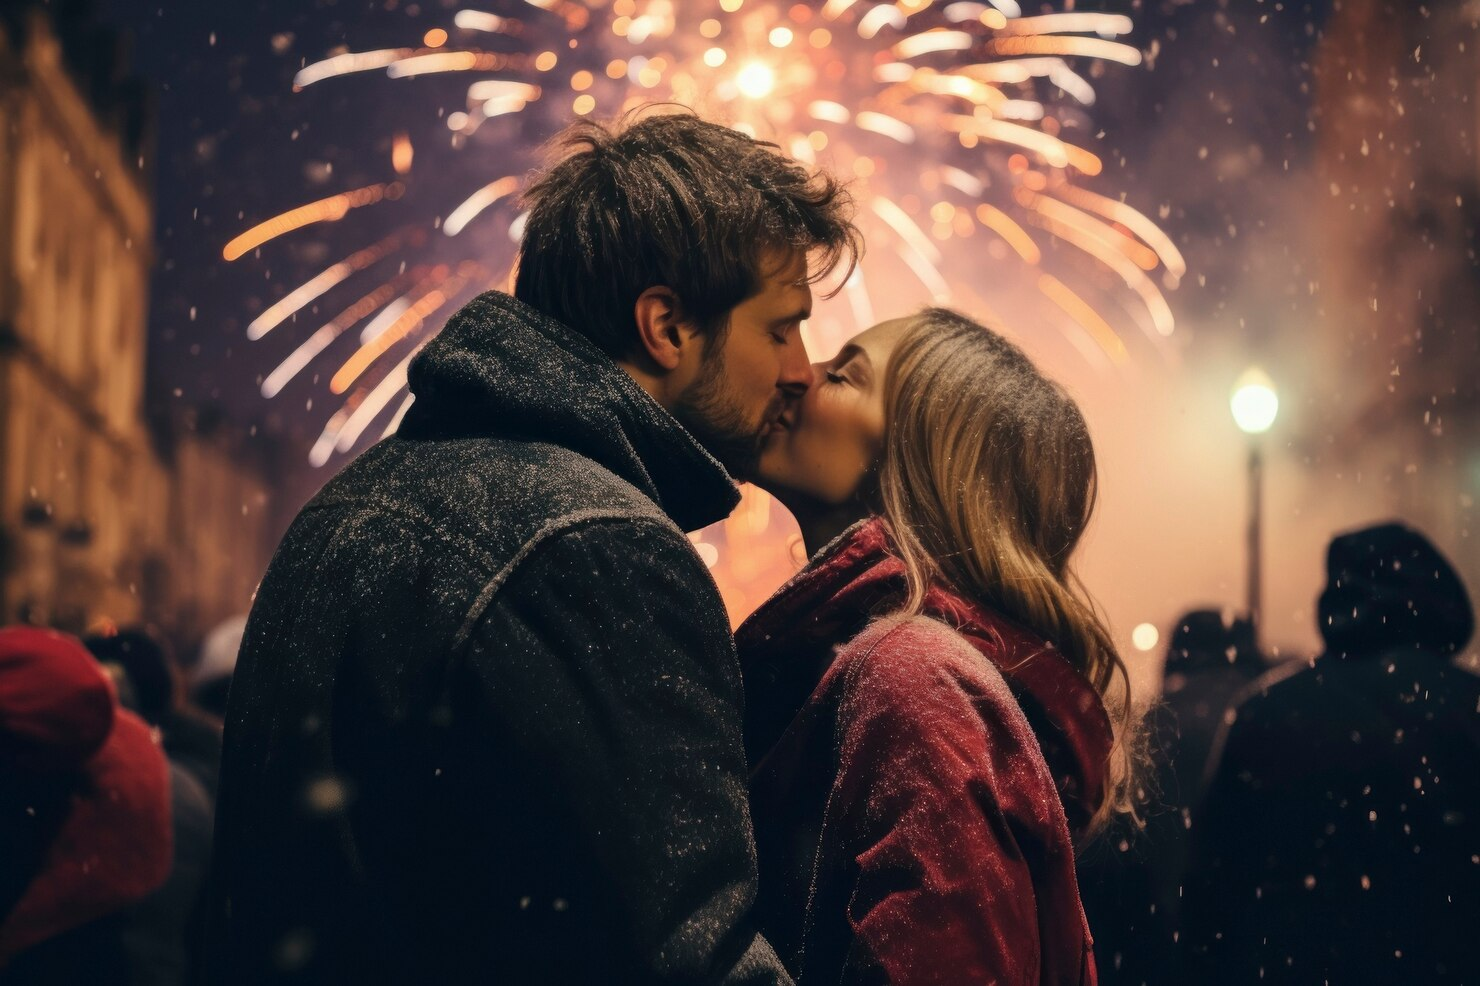 A couple kissing amidst the New Year fireworks.